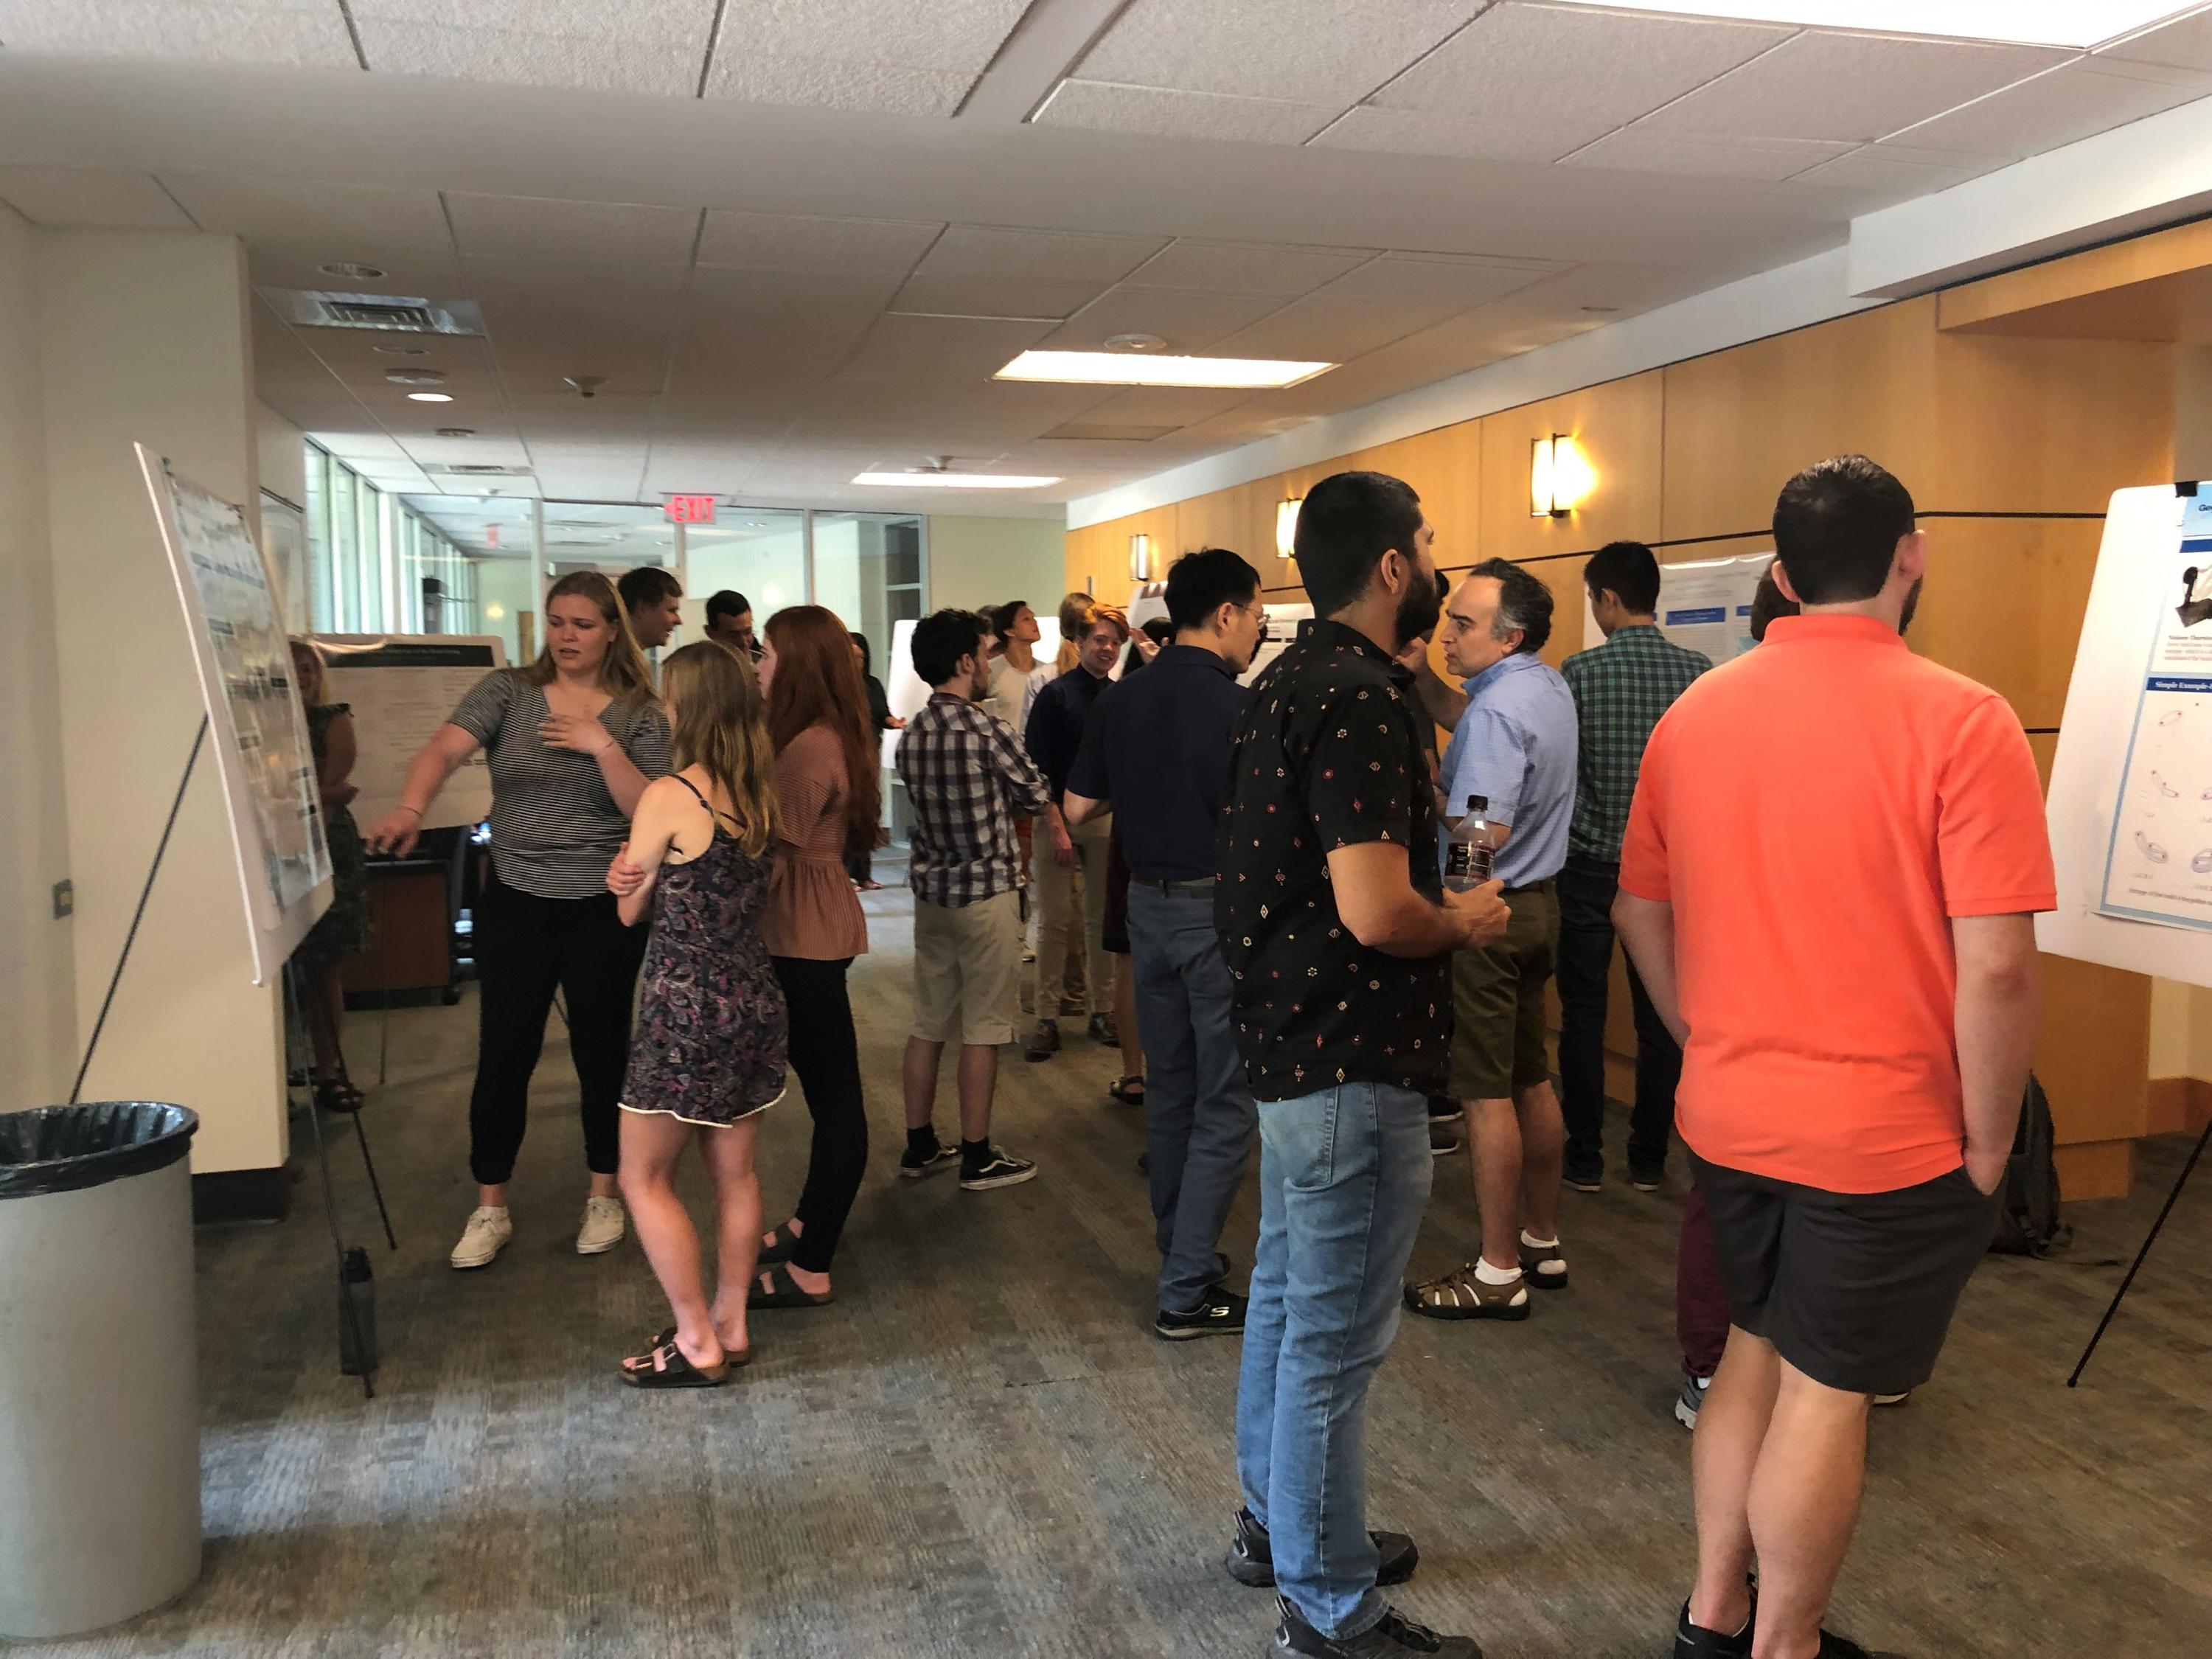 Undergraduates present their research during the School of Math's Summer REU 2019 poster session (Photo by Yasmine Bassil)